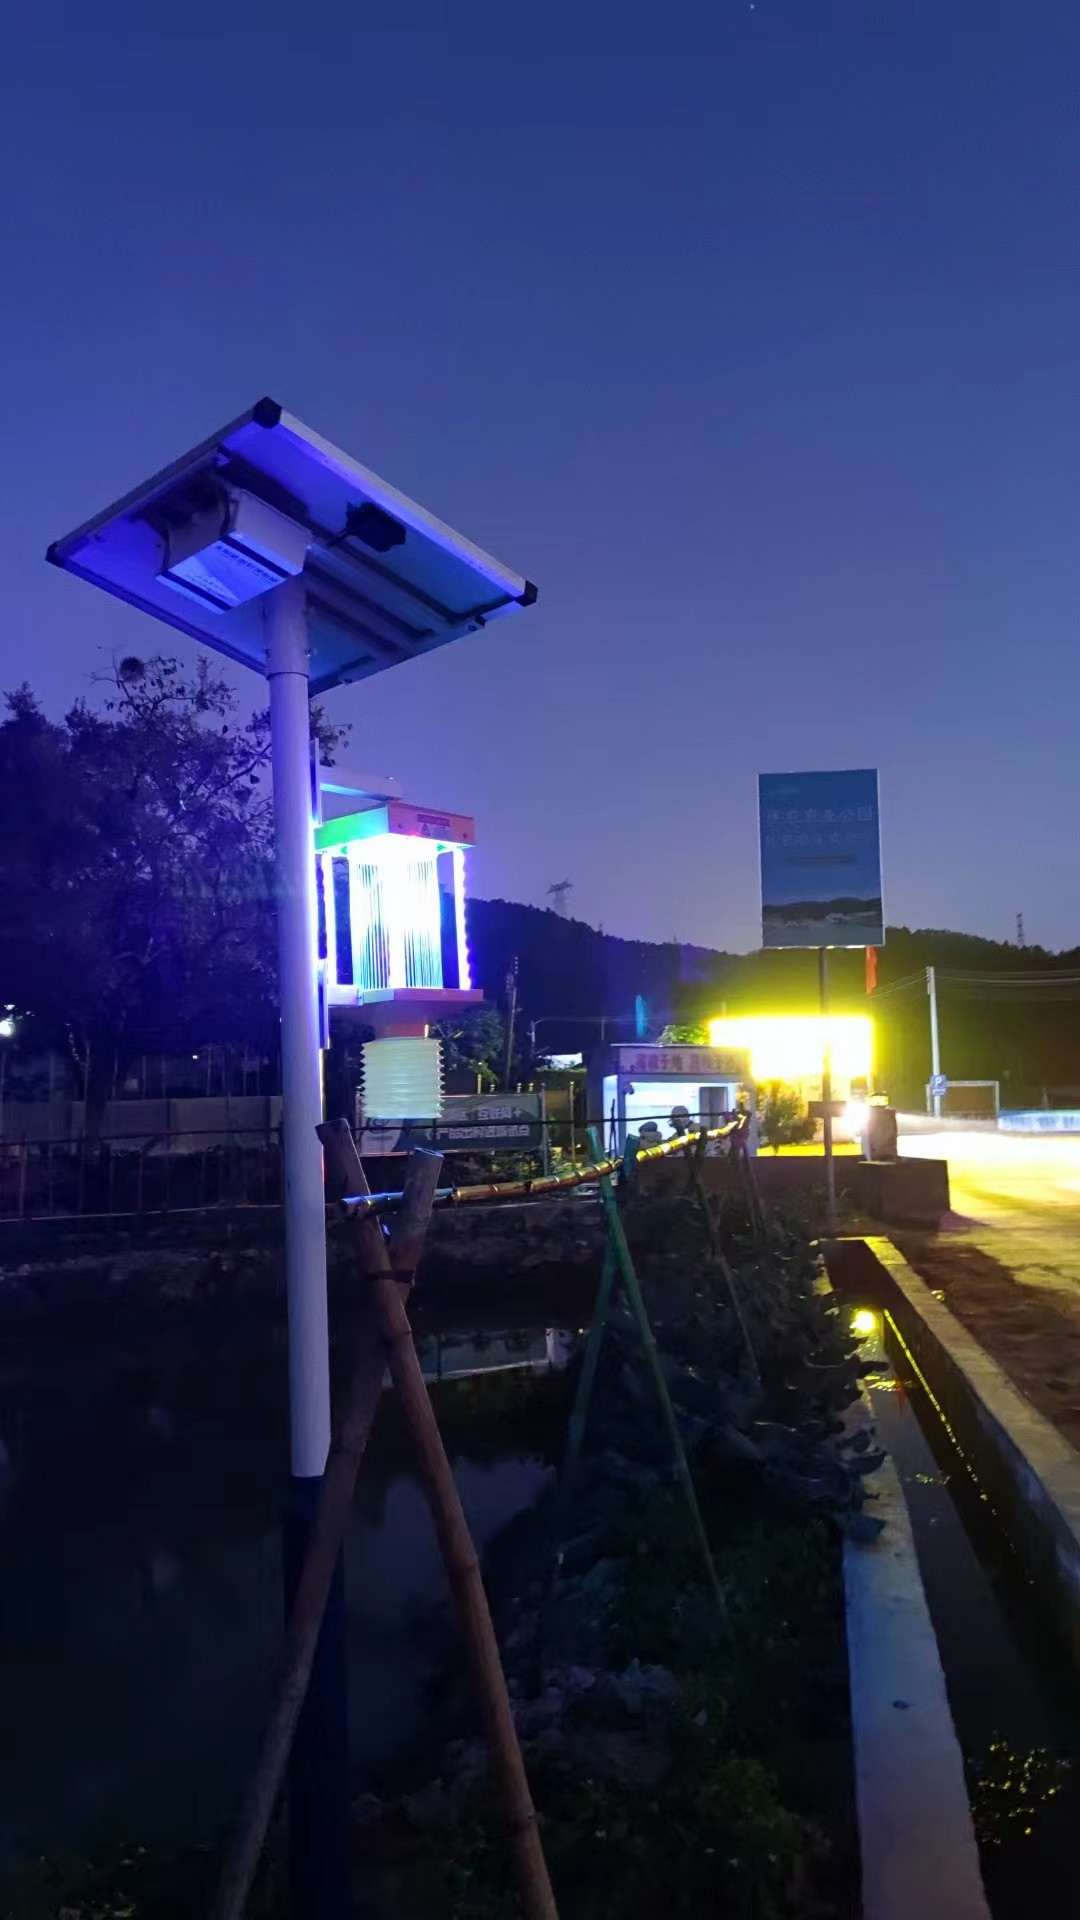 Solar insecticidal lamps are more energy-efficient and efficient